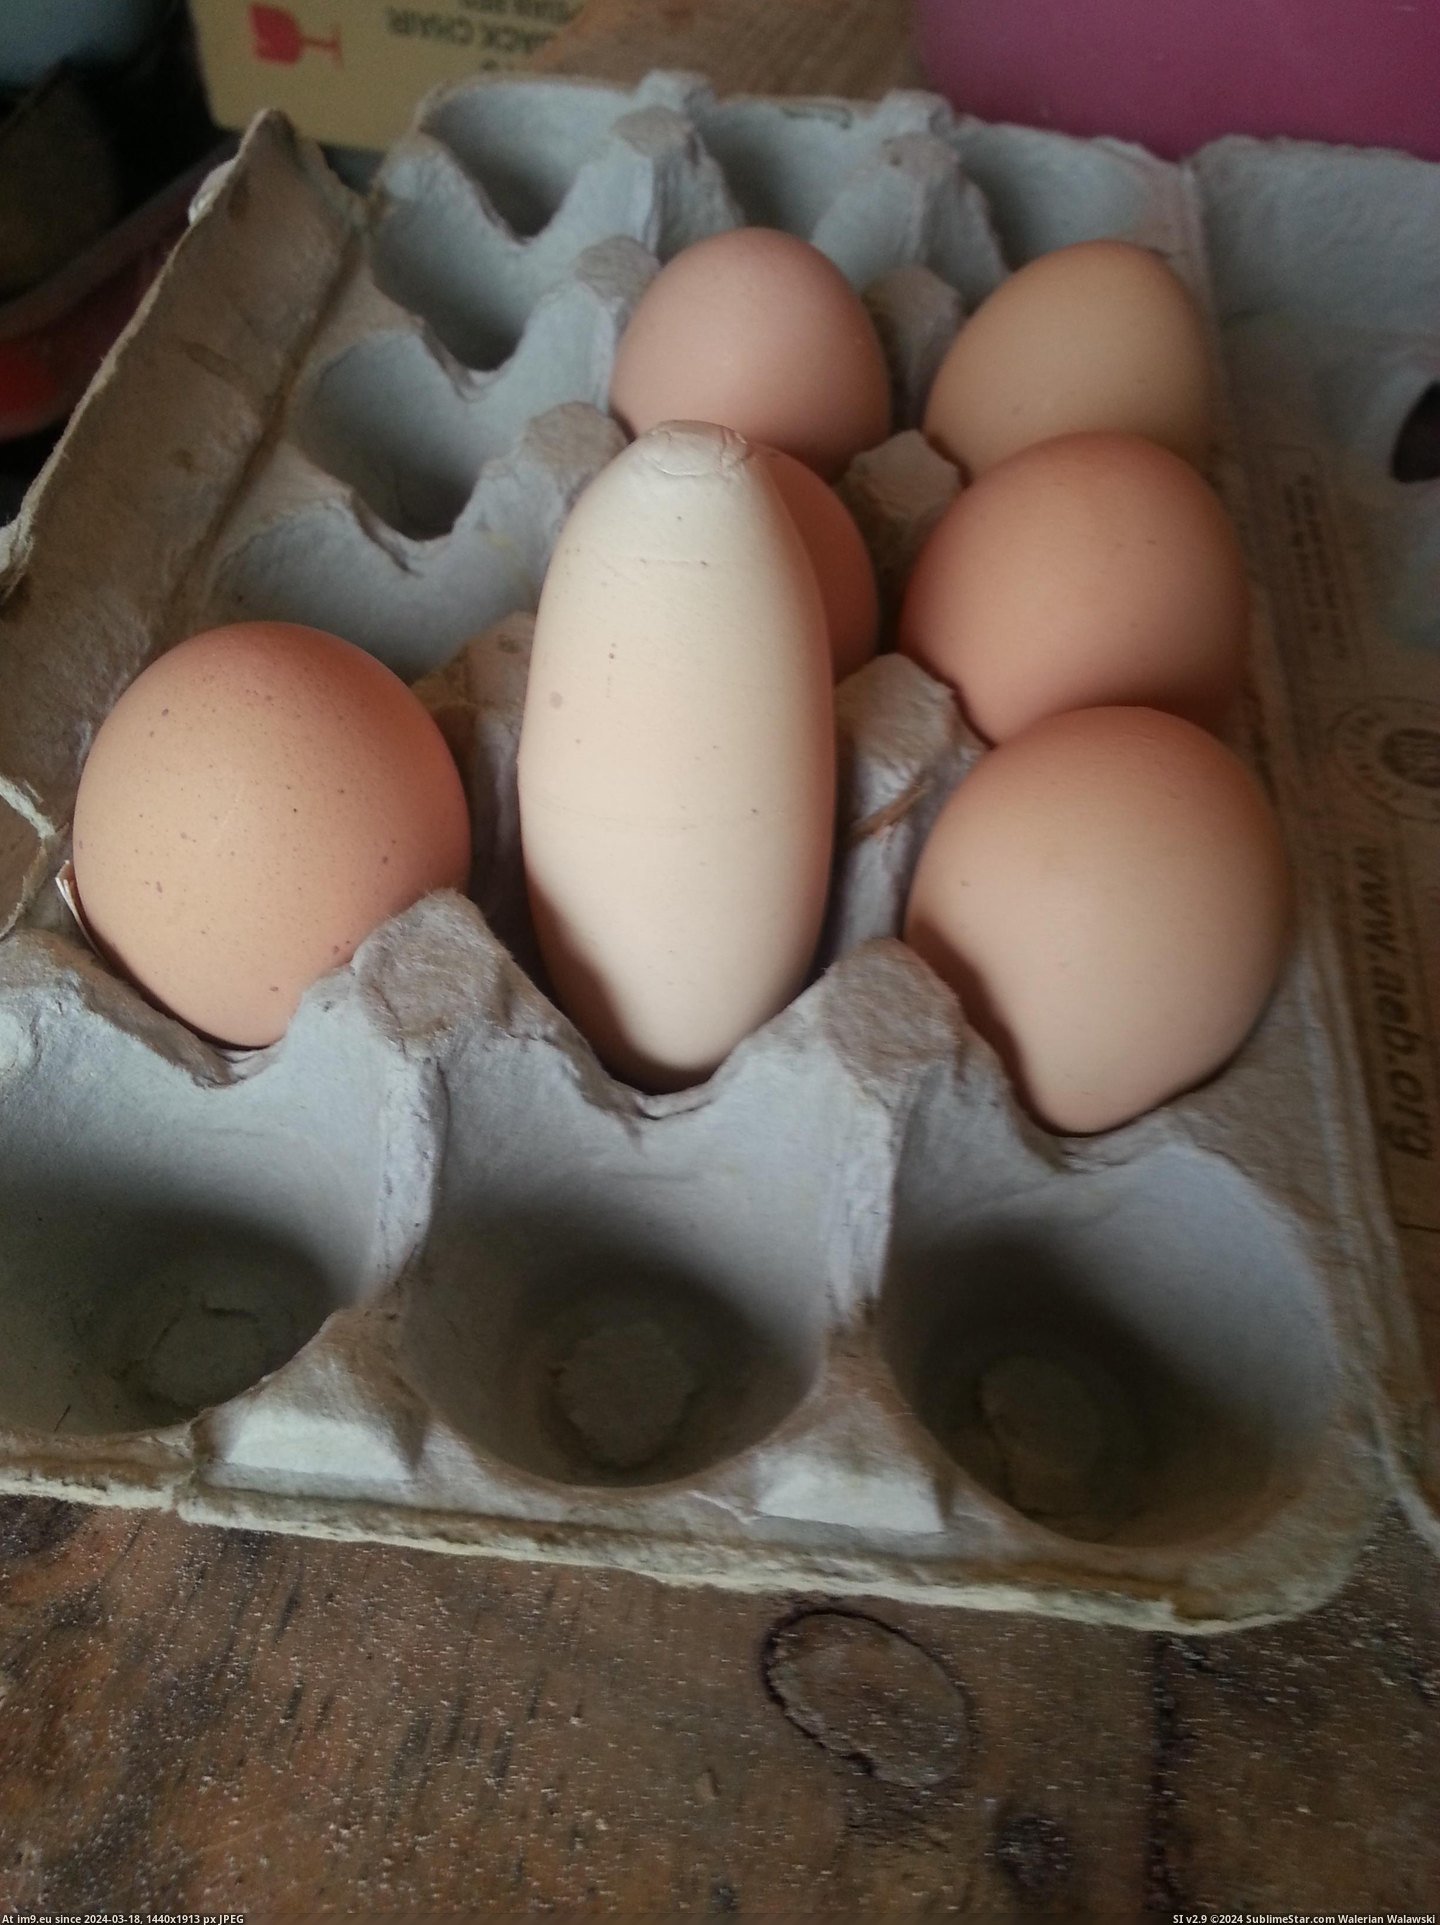 #Wtf #One #Laid #Ducks #Chickens #Egg #Raise [Wtf] We raise chickens and ducks. One of the chickens laid this egg today. Pic. (Image of album My r/WTF favs))